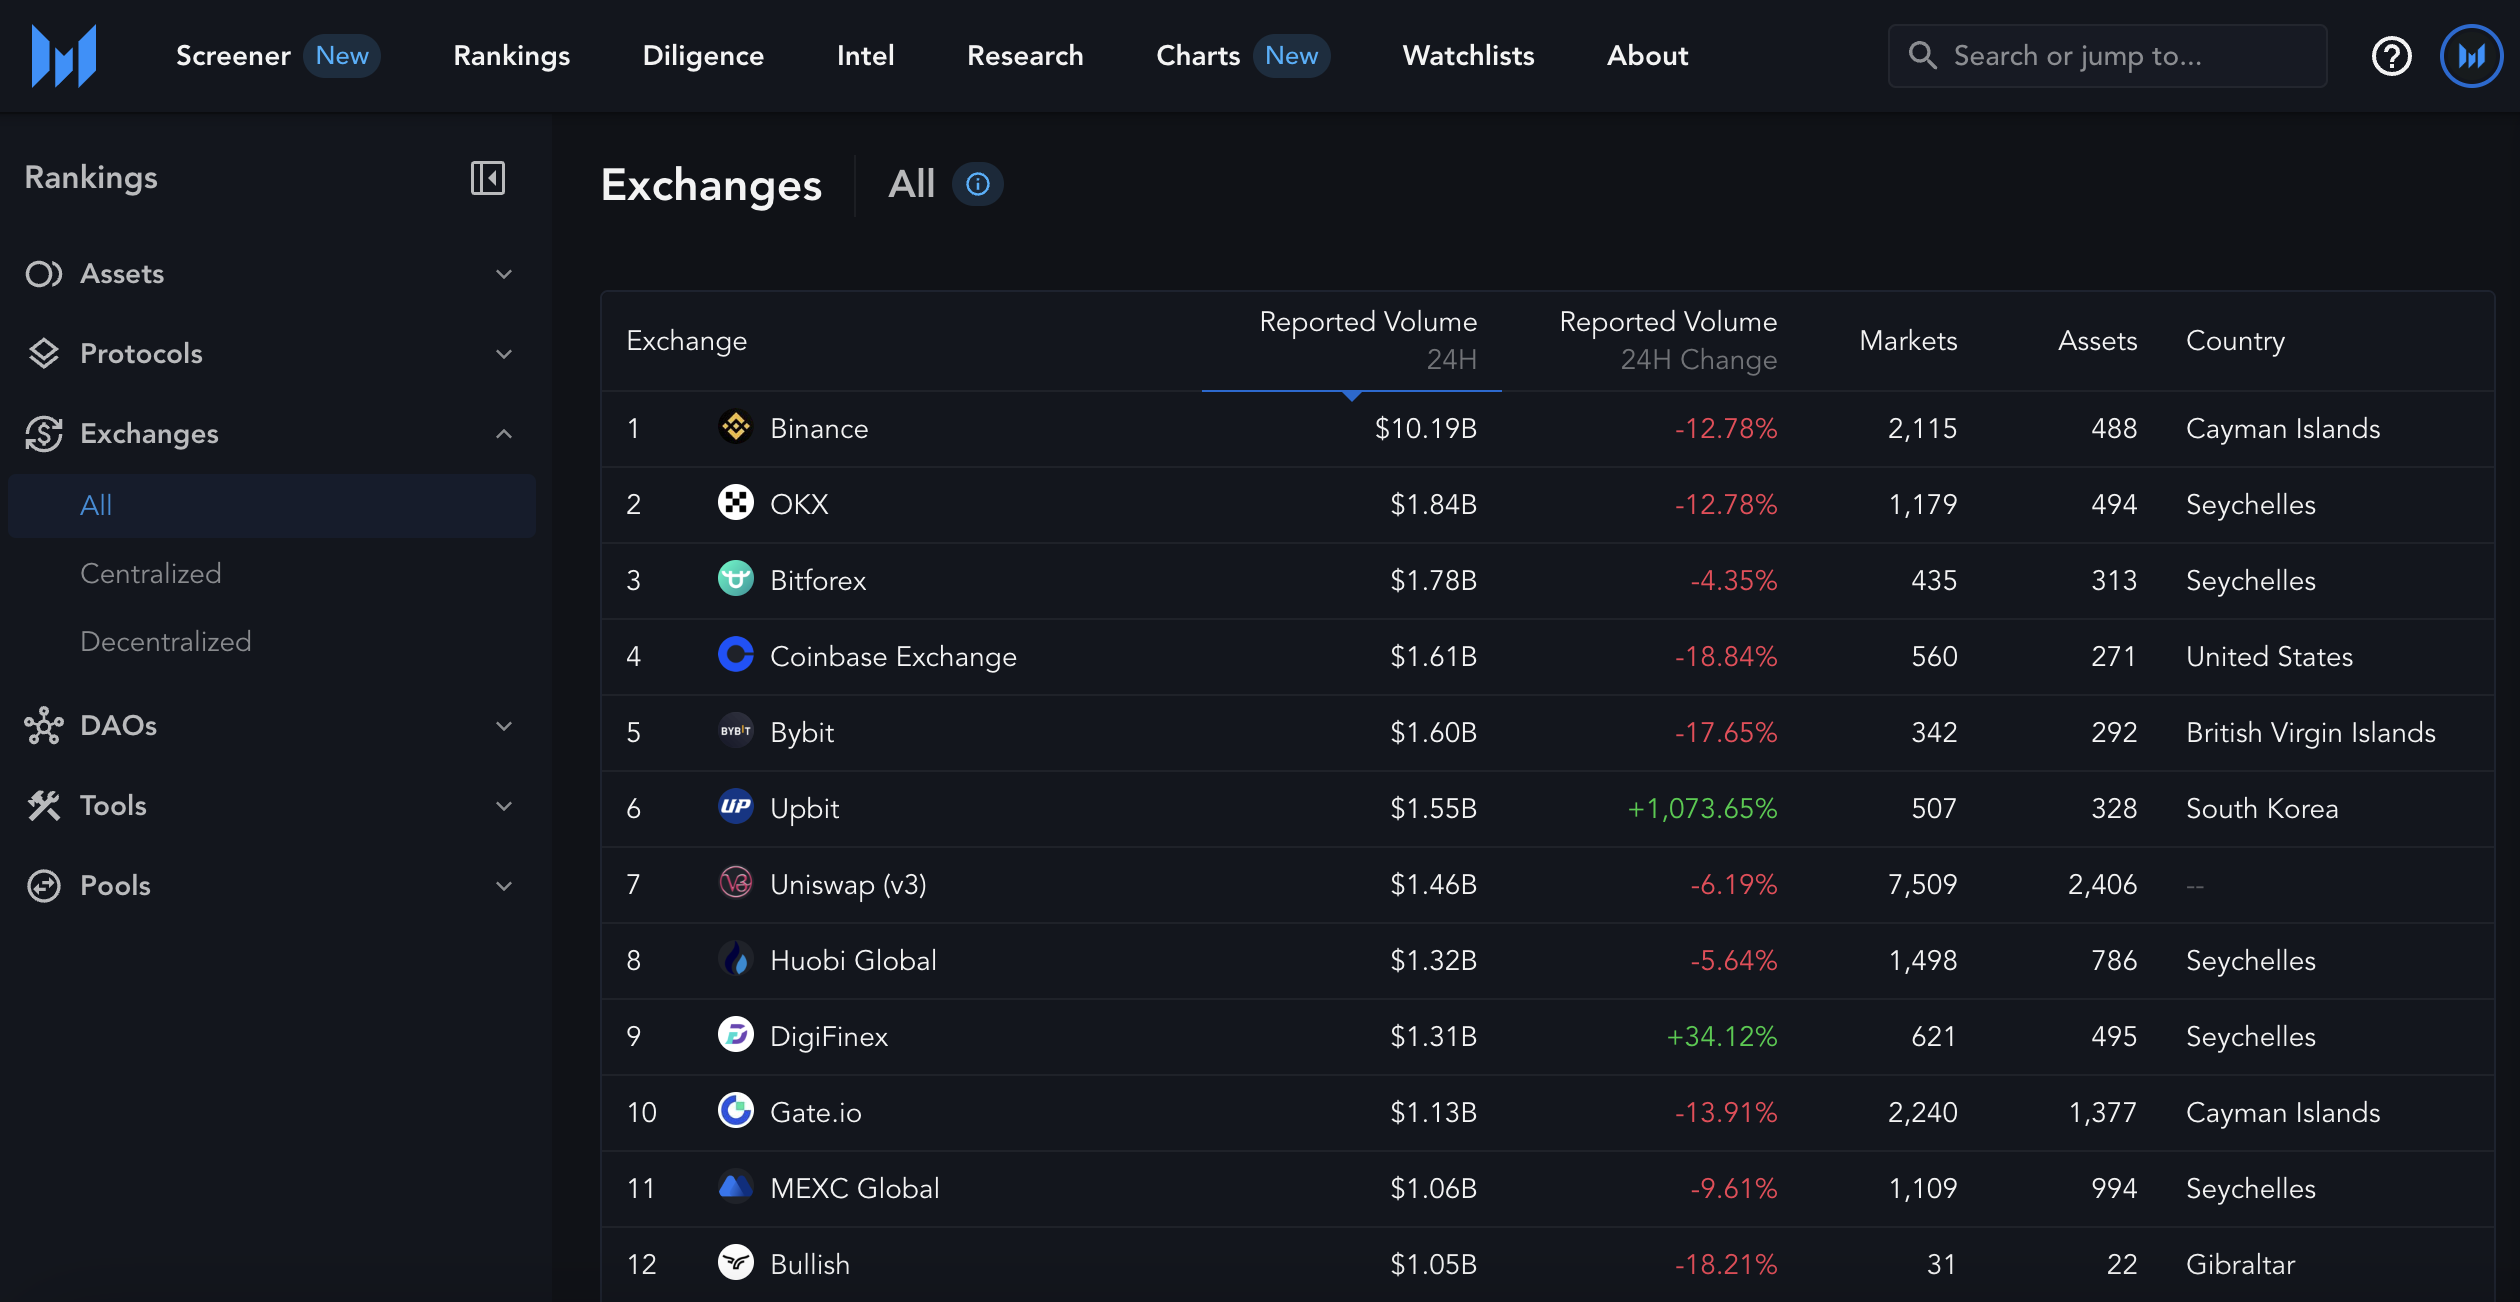 Rankings Tab > Exchanges Overview